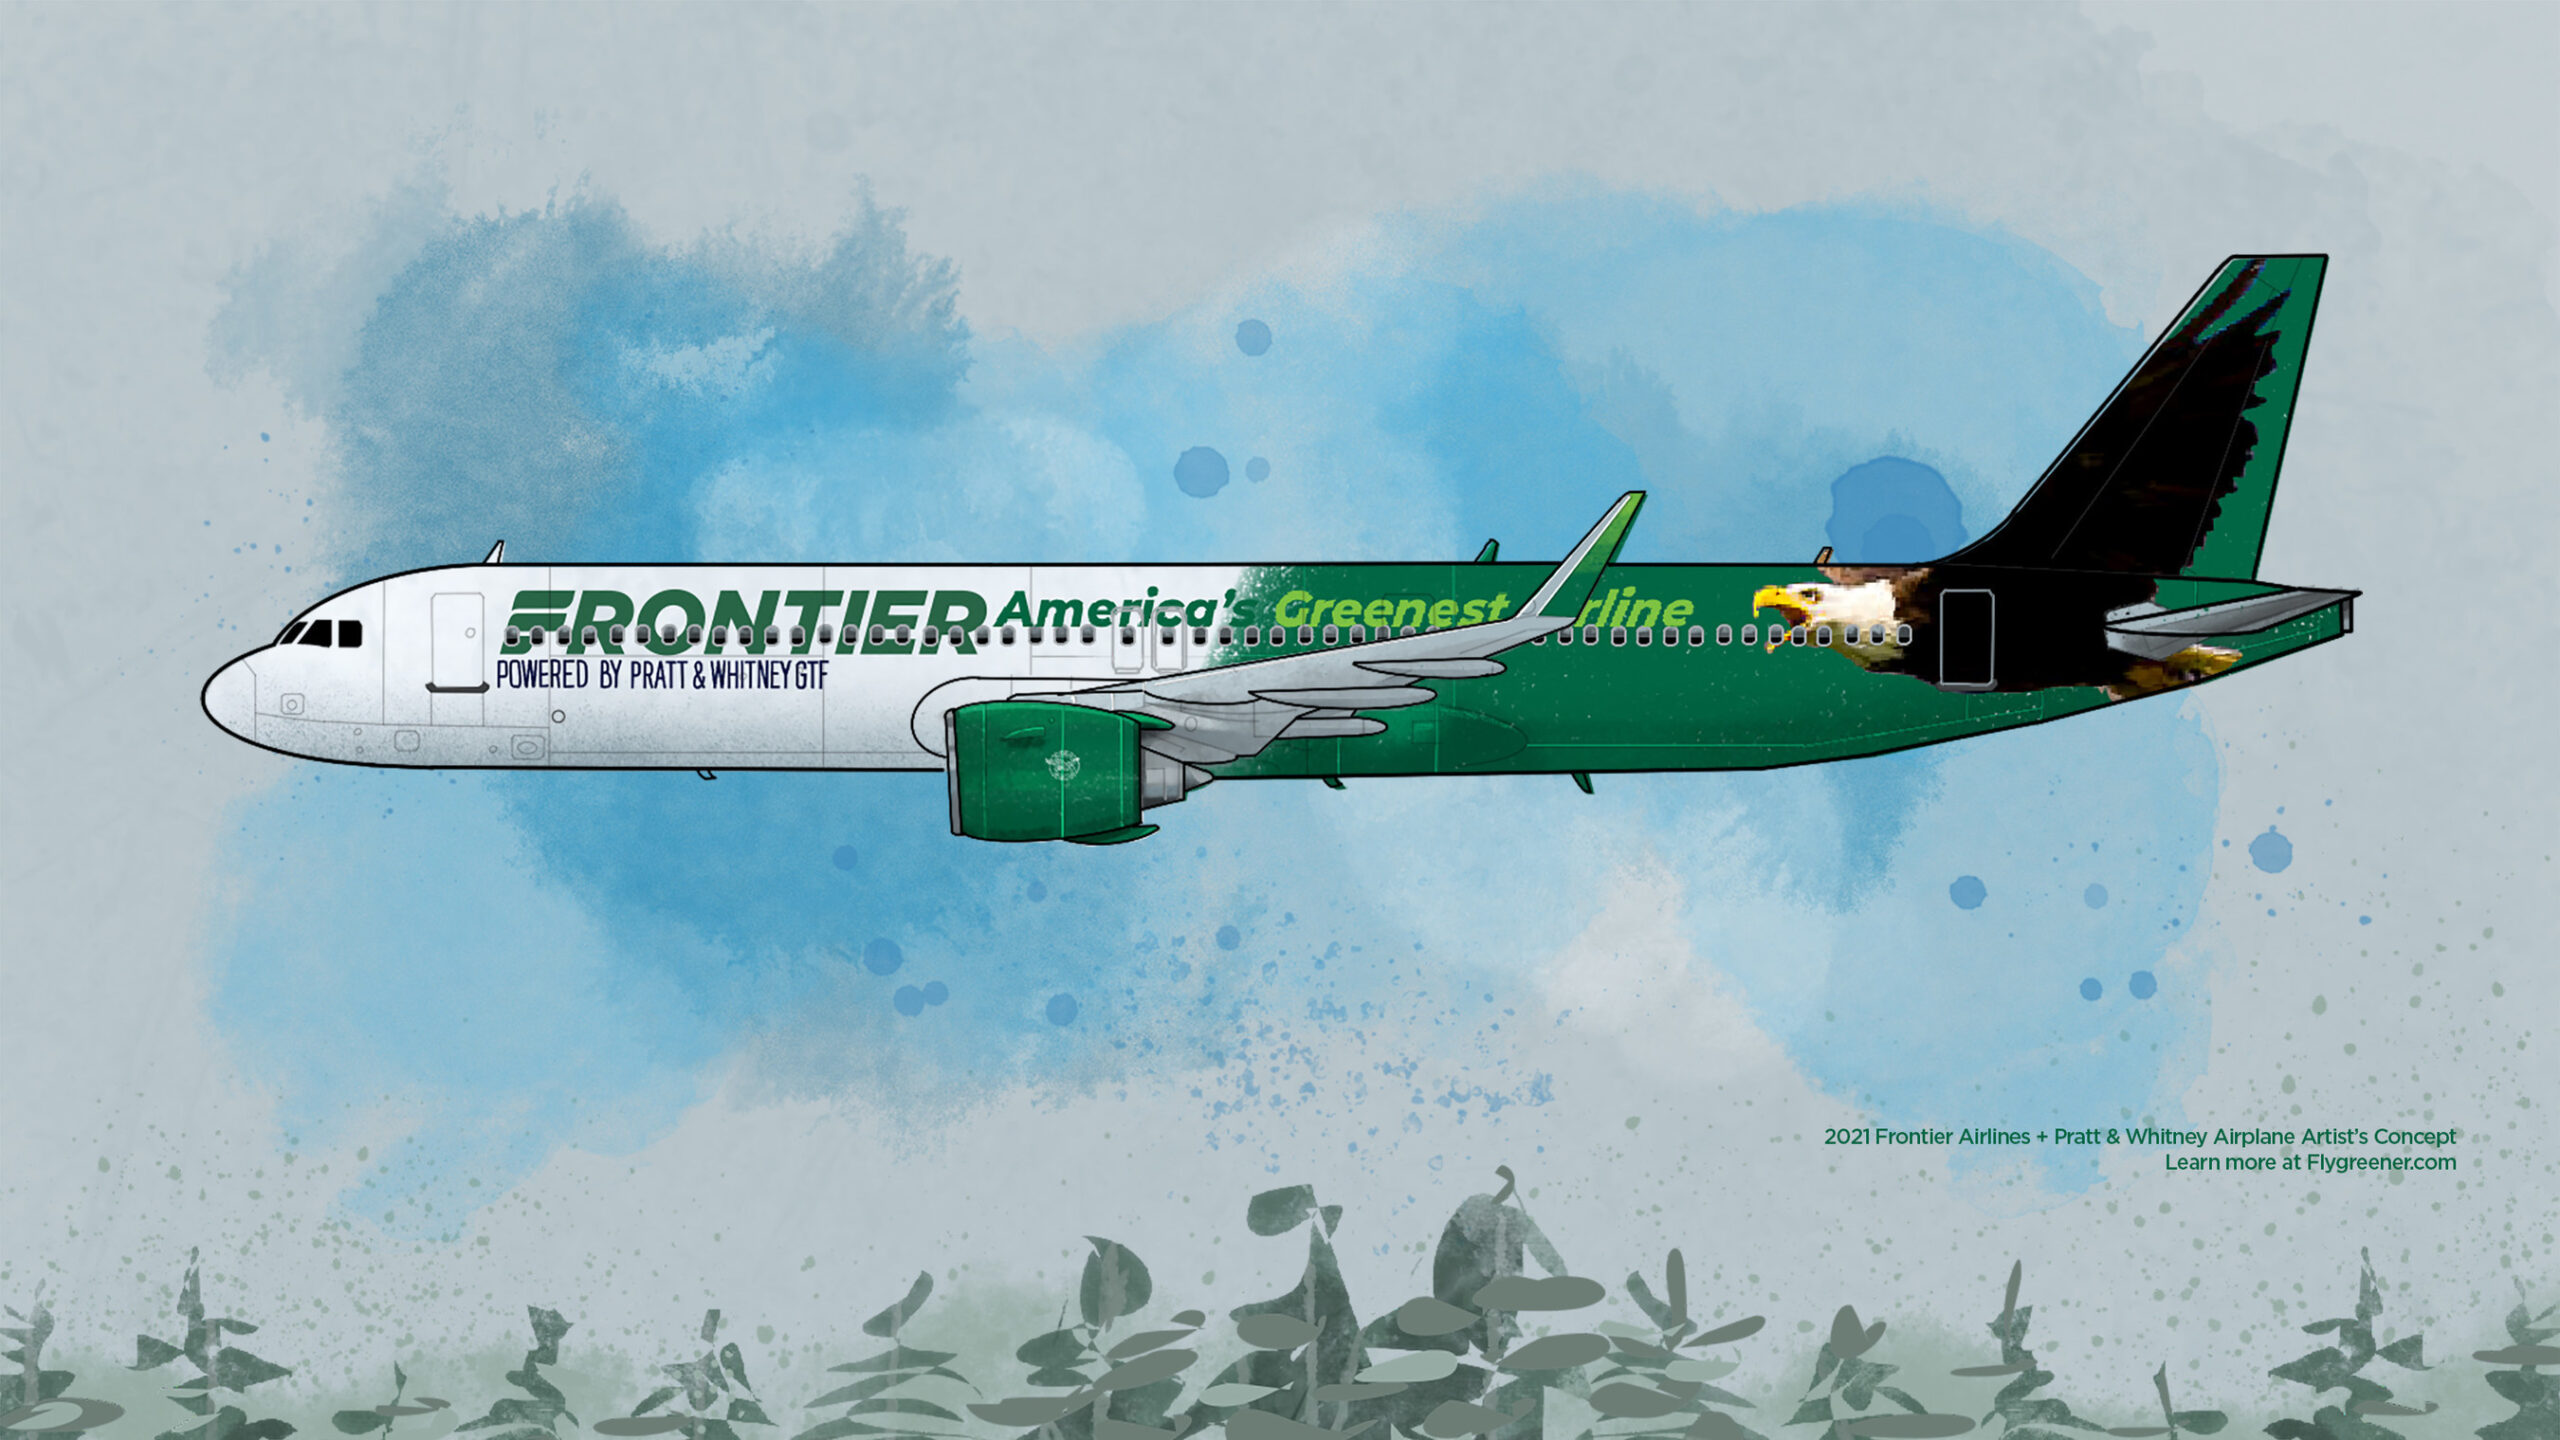 Frontier-A321neo-GTF-livery-final